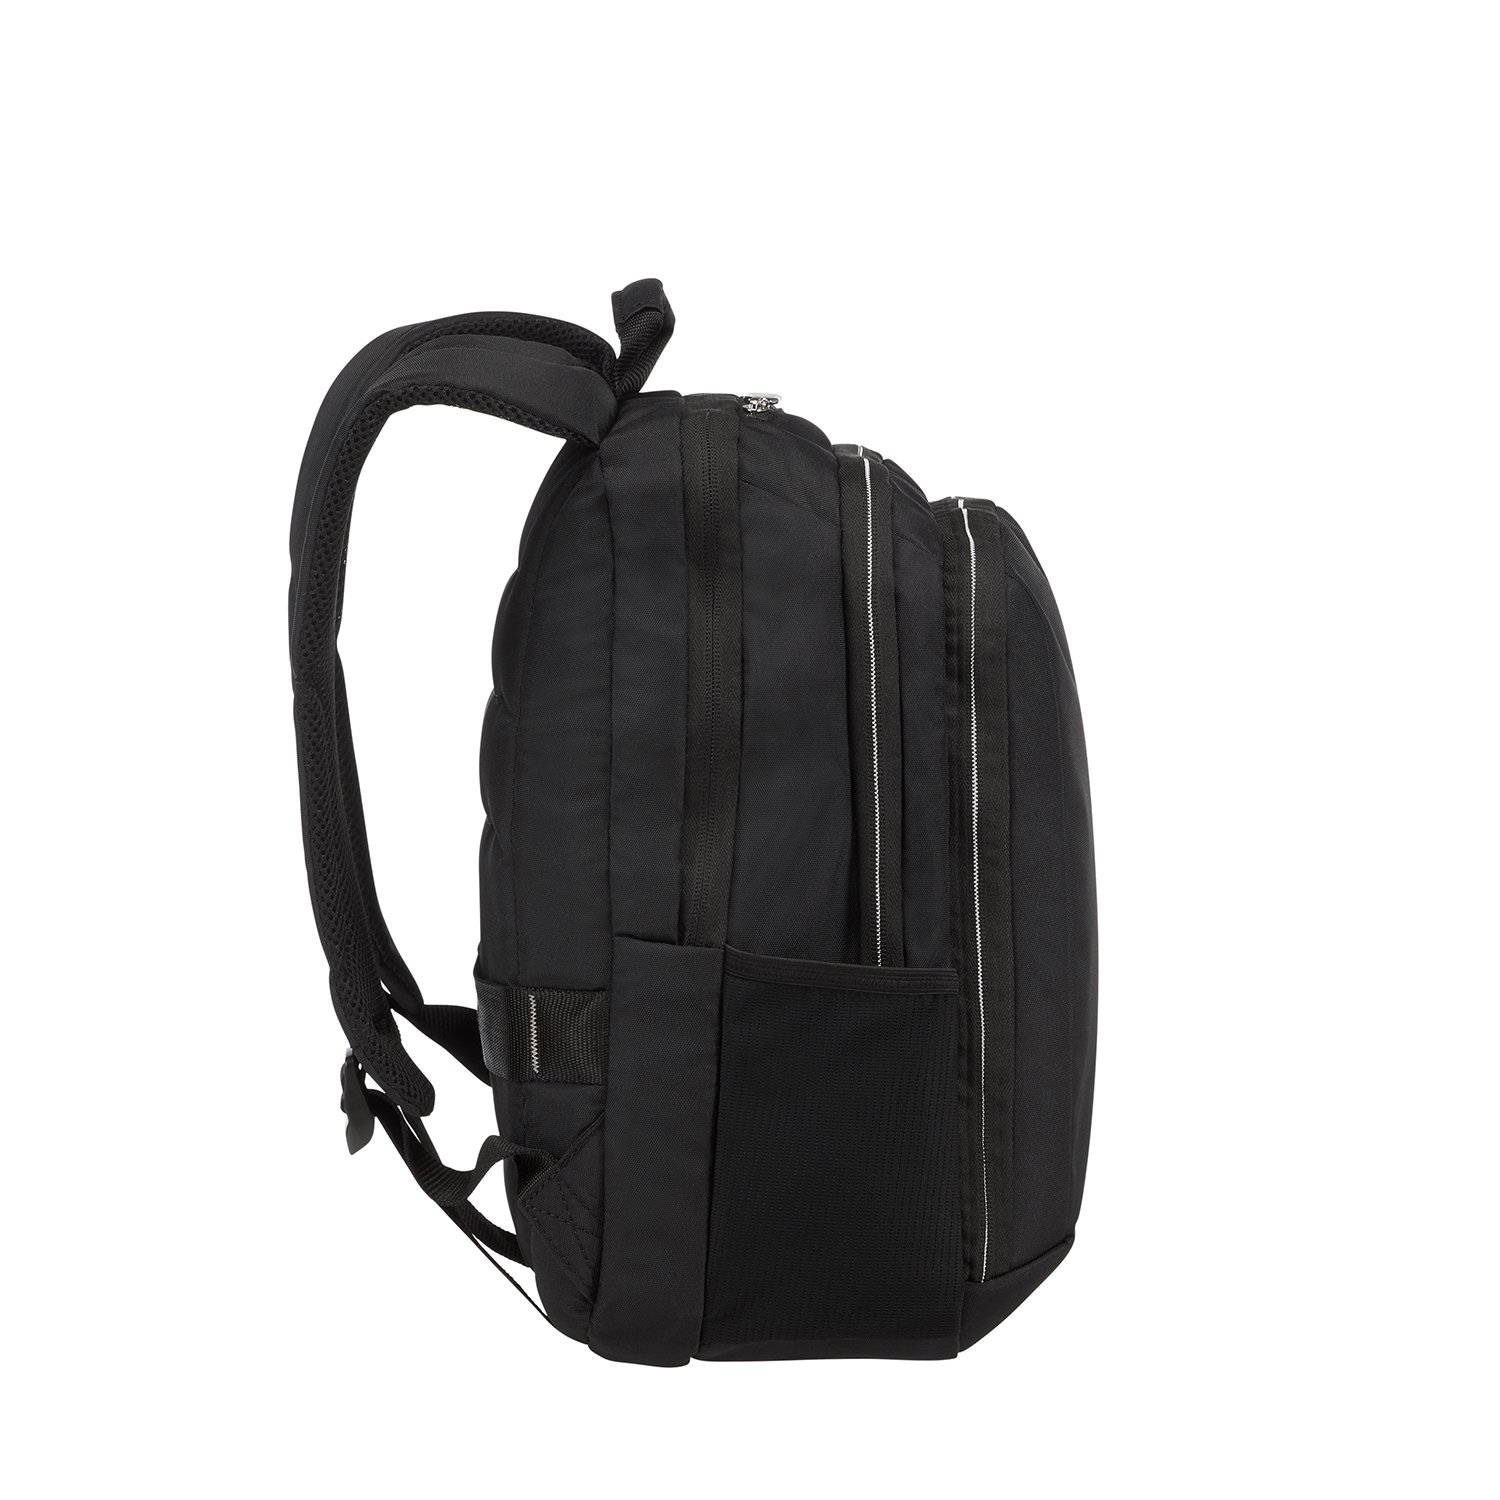 GUARDIT CLASSY-BACKPACK 14.1"" SKH1-002-SF000*09